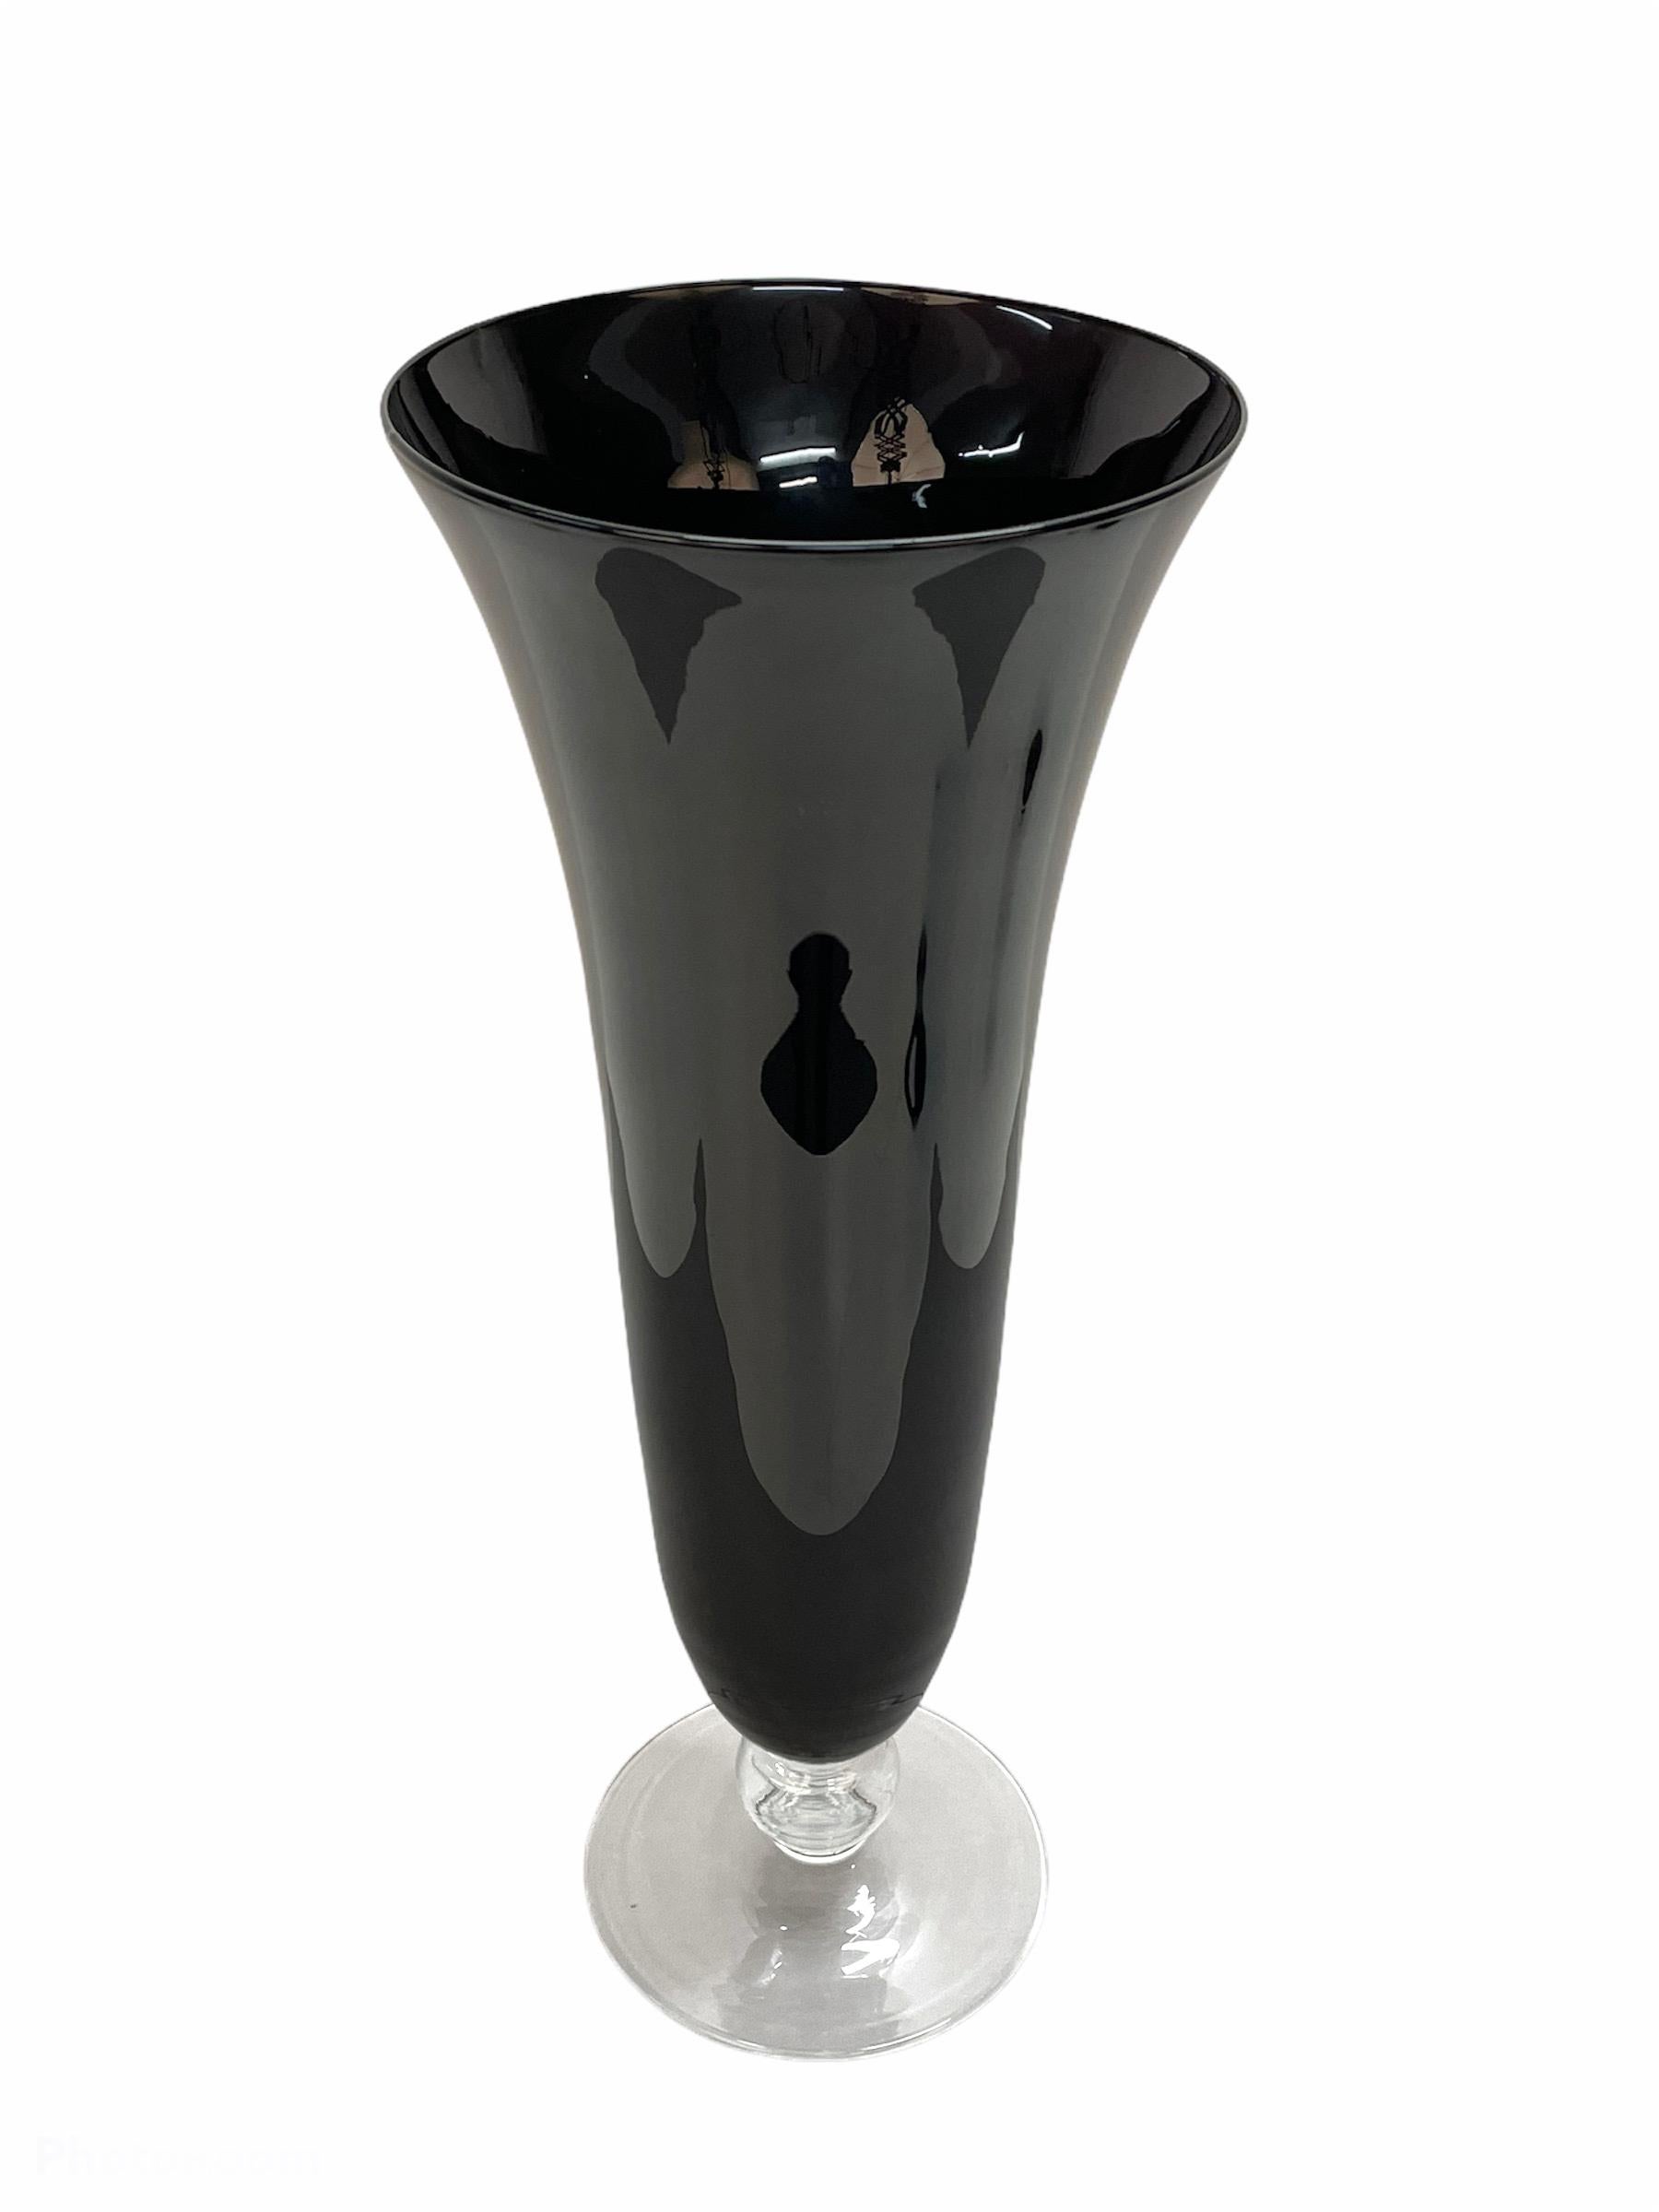 Amazing midcentury large black glass artistic vase with crystal base. This fantastic item was designed in Italy during the 1980s.

This piece is very elegant as it has a very slick design with simple and chic lines. It features a solid black glass